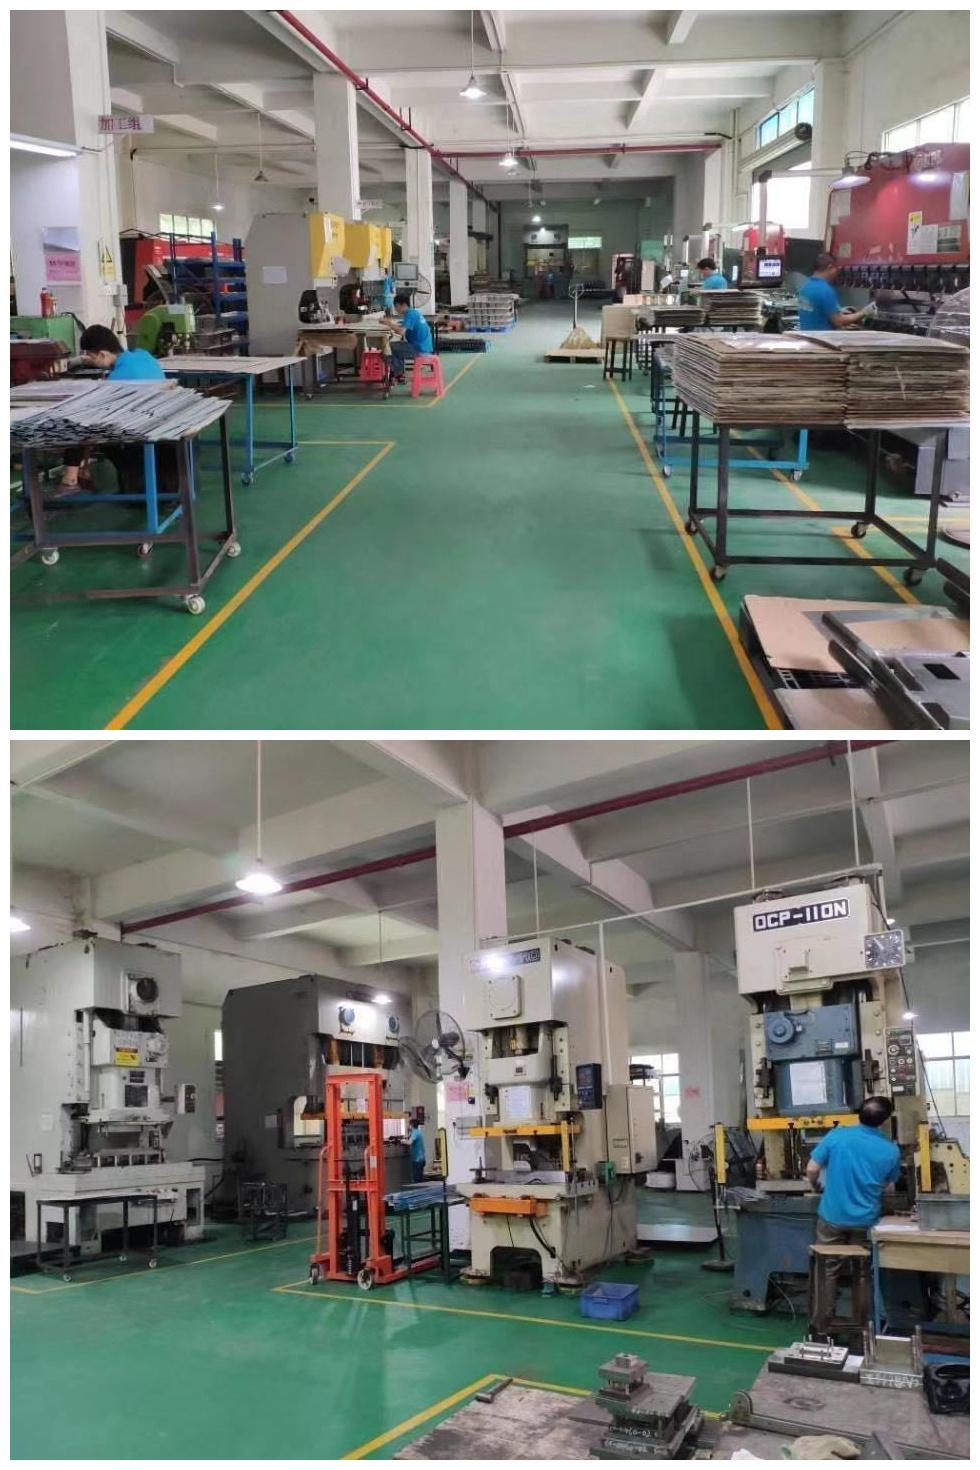 Black Customized Precision Sheet Metal Fabrication Products for Machinery